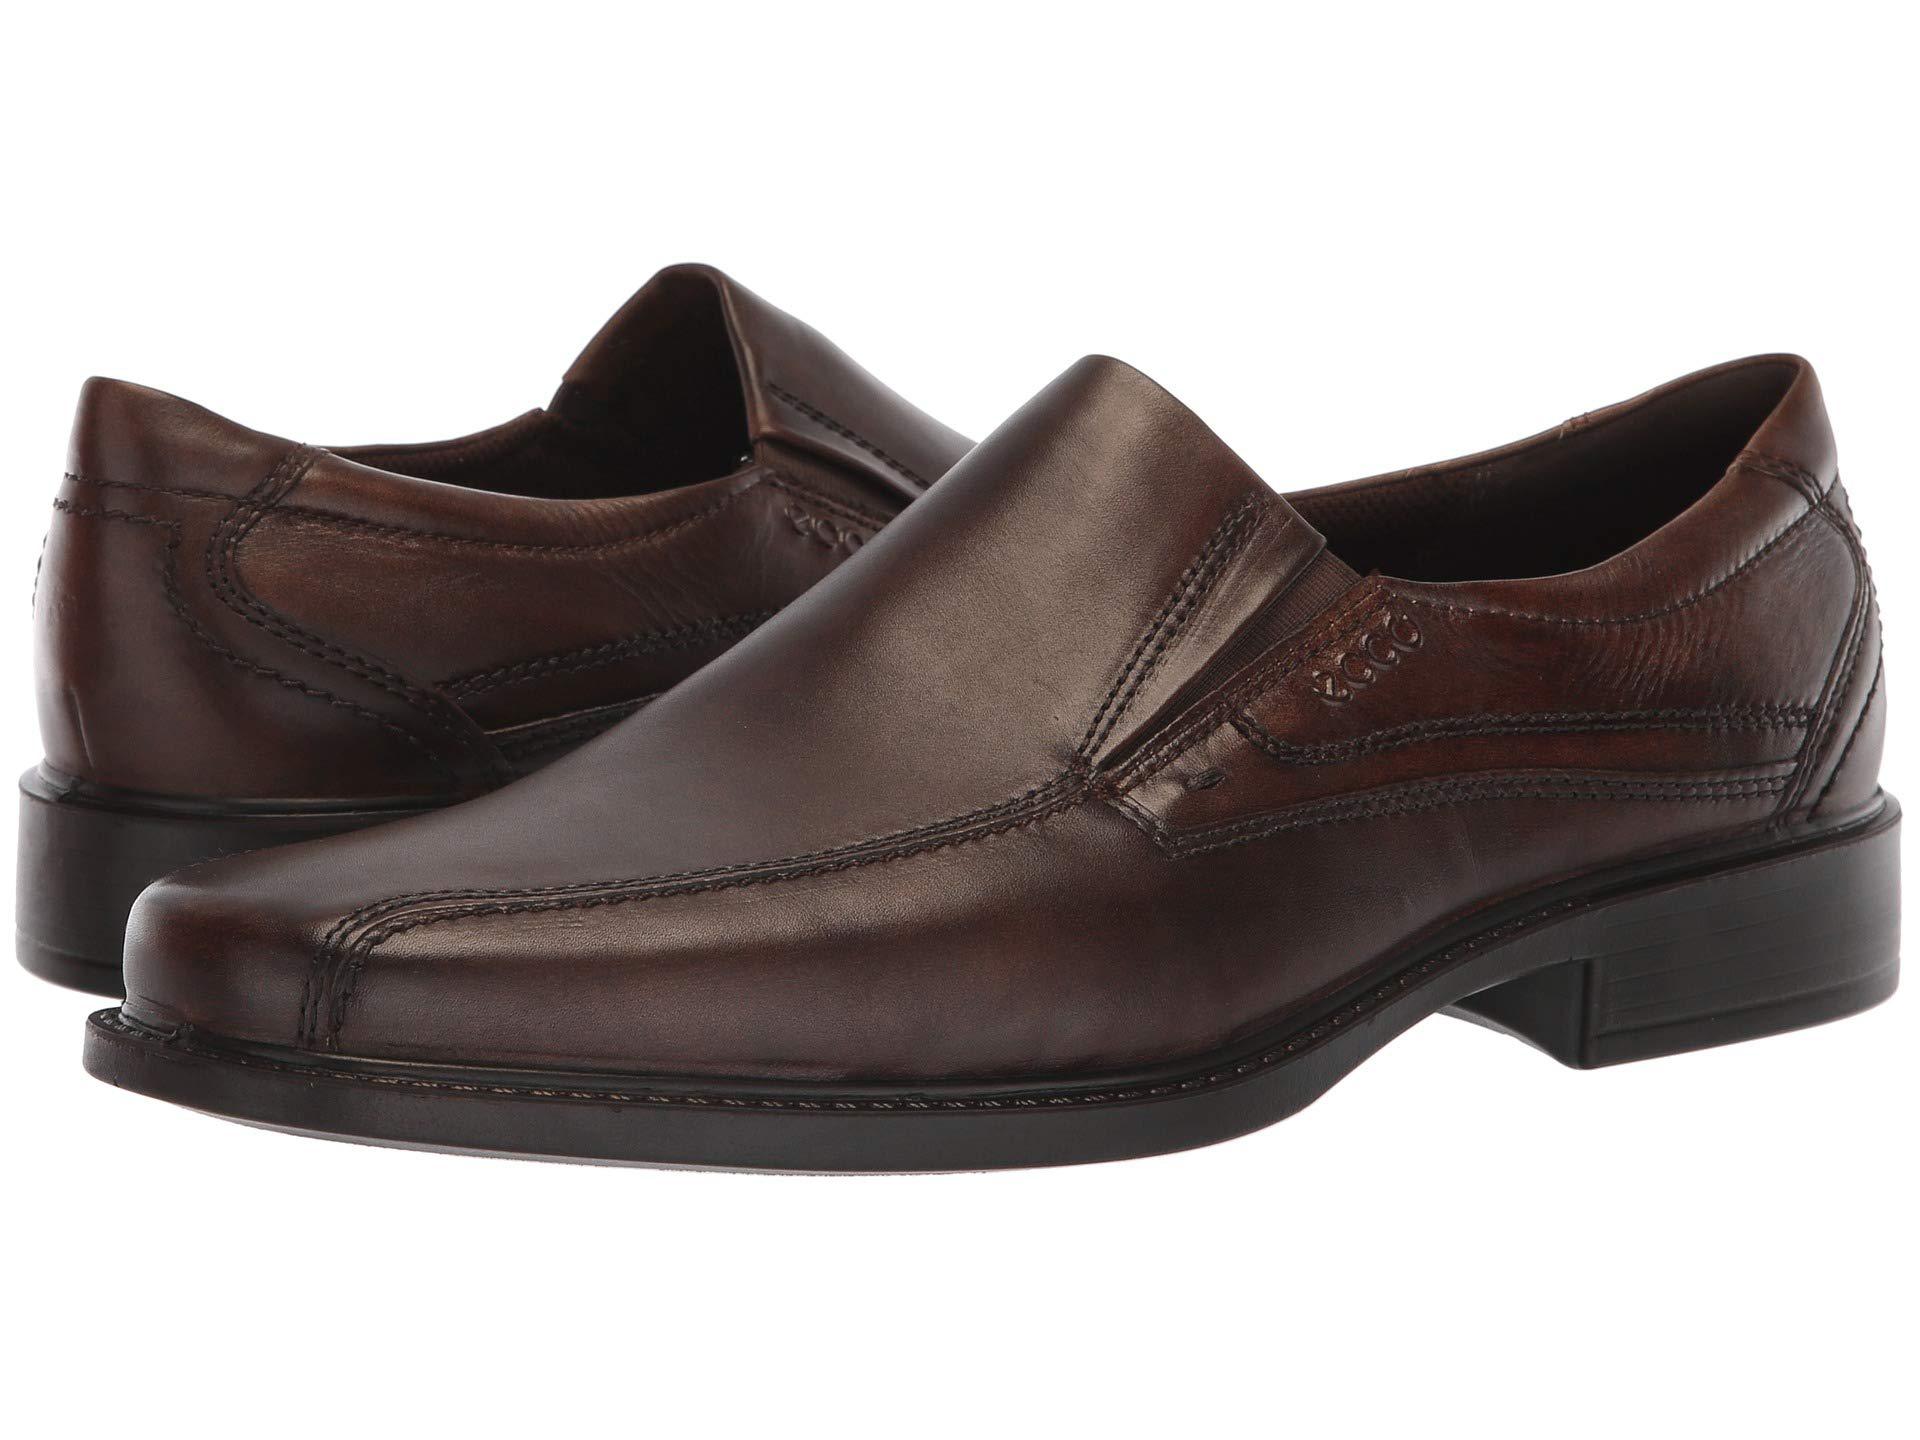 Lyst Ecco New Jersey Slip On Cocoa Brown Mens Slip On Dress Shoes In Brown For Men 9965